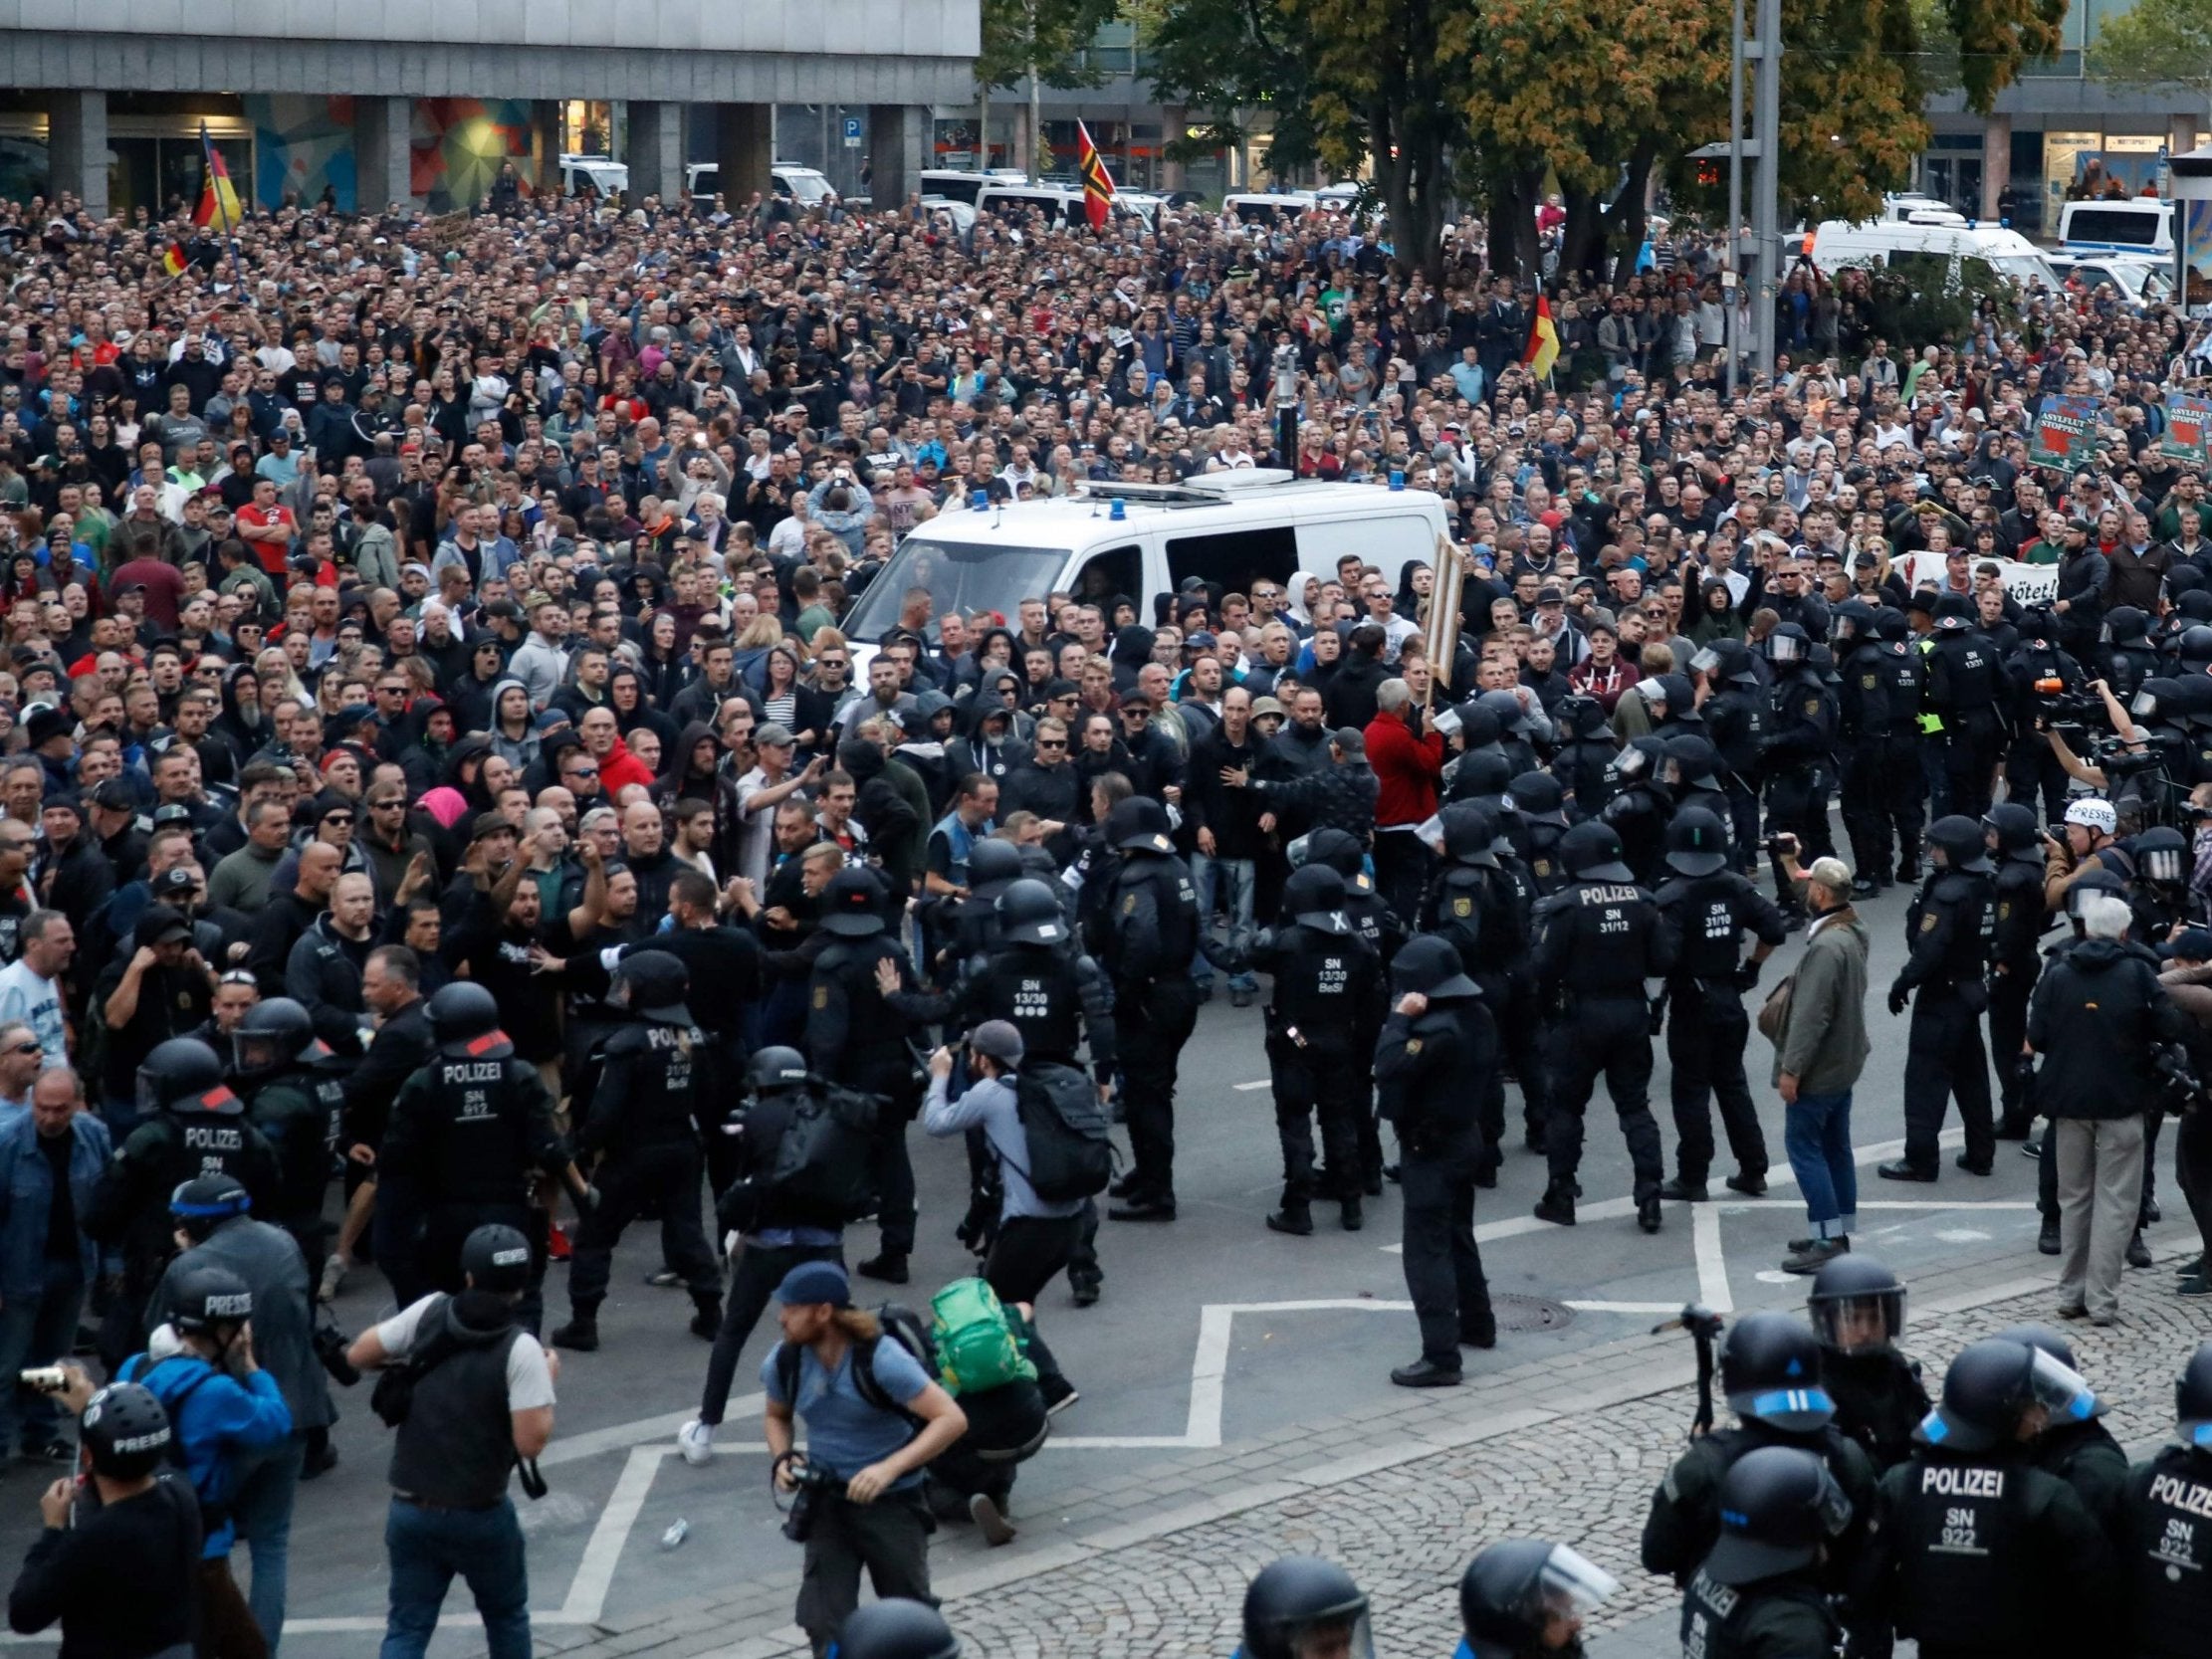 Pegida led calls for protests after the man's death